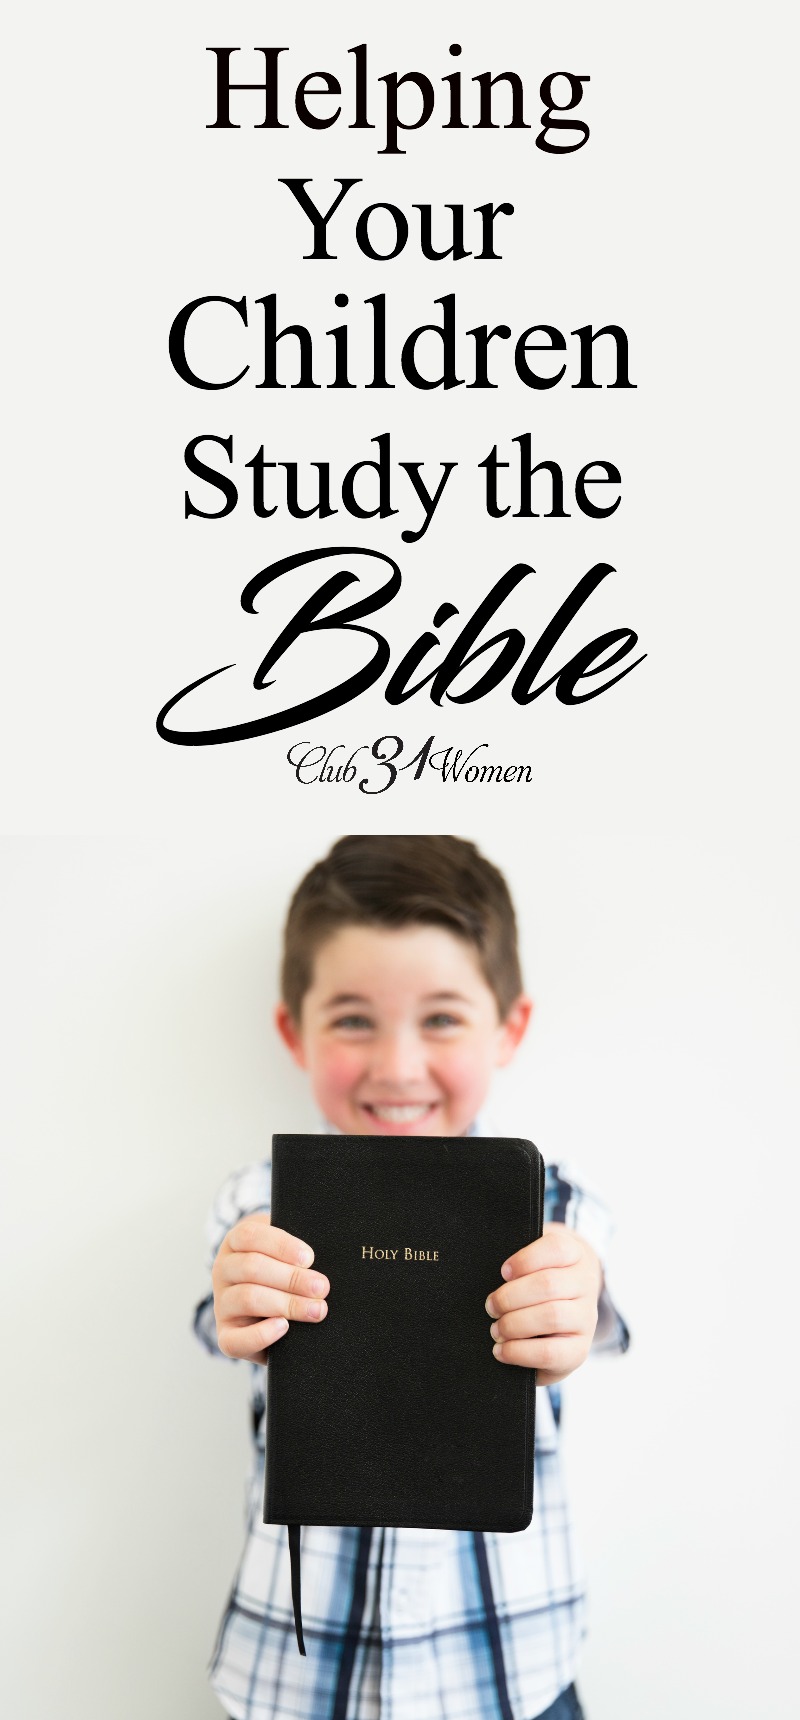 Do you need help with studying the bible with your children? With the right tools and knowledge, it doesn't need to be intimidating.  via @Club31Women